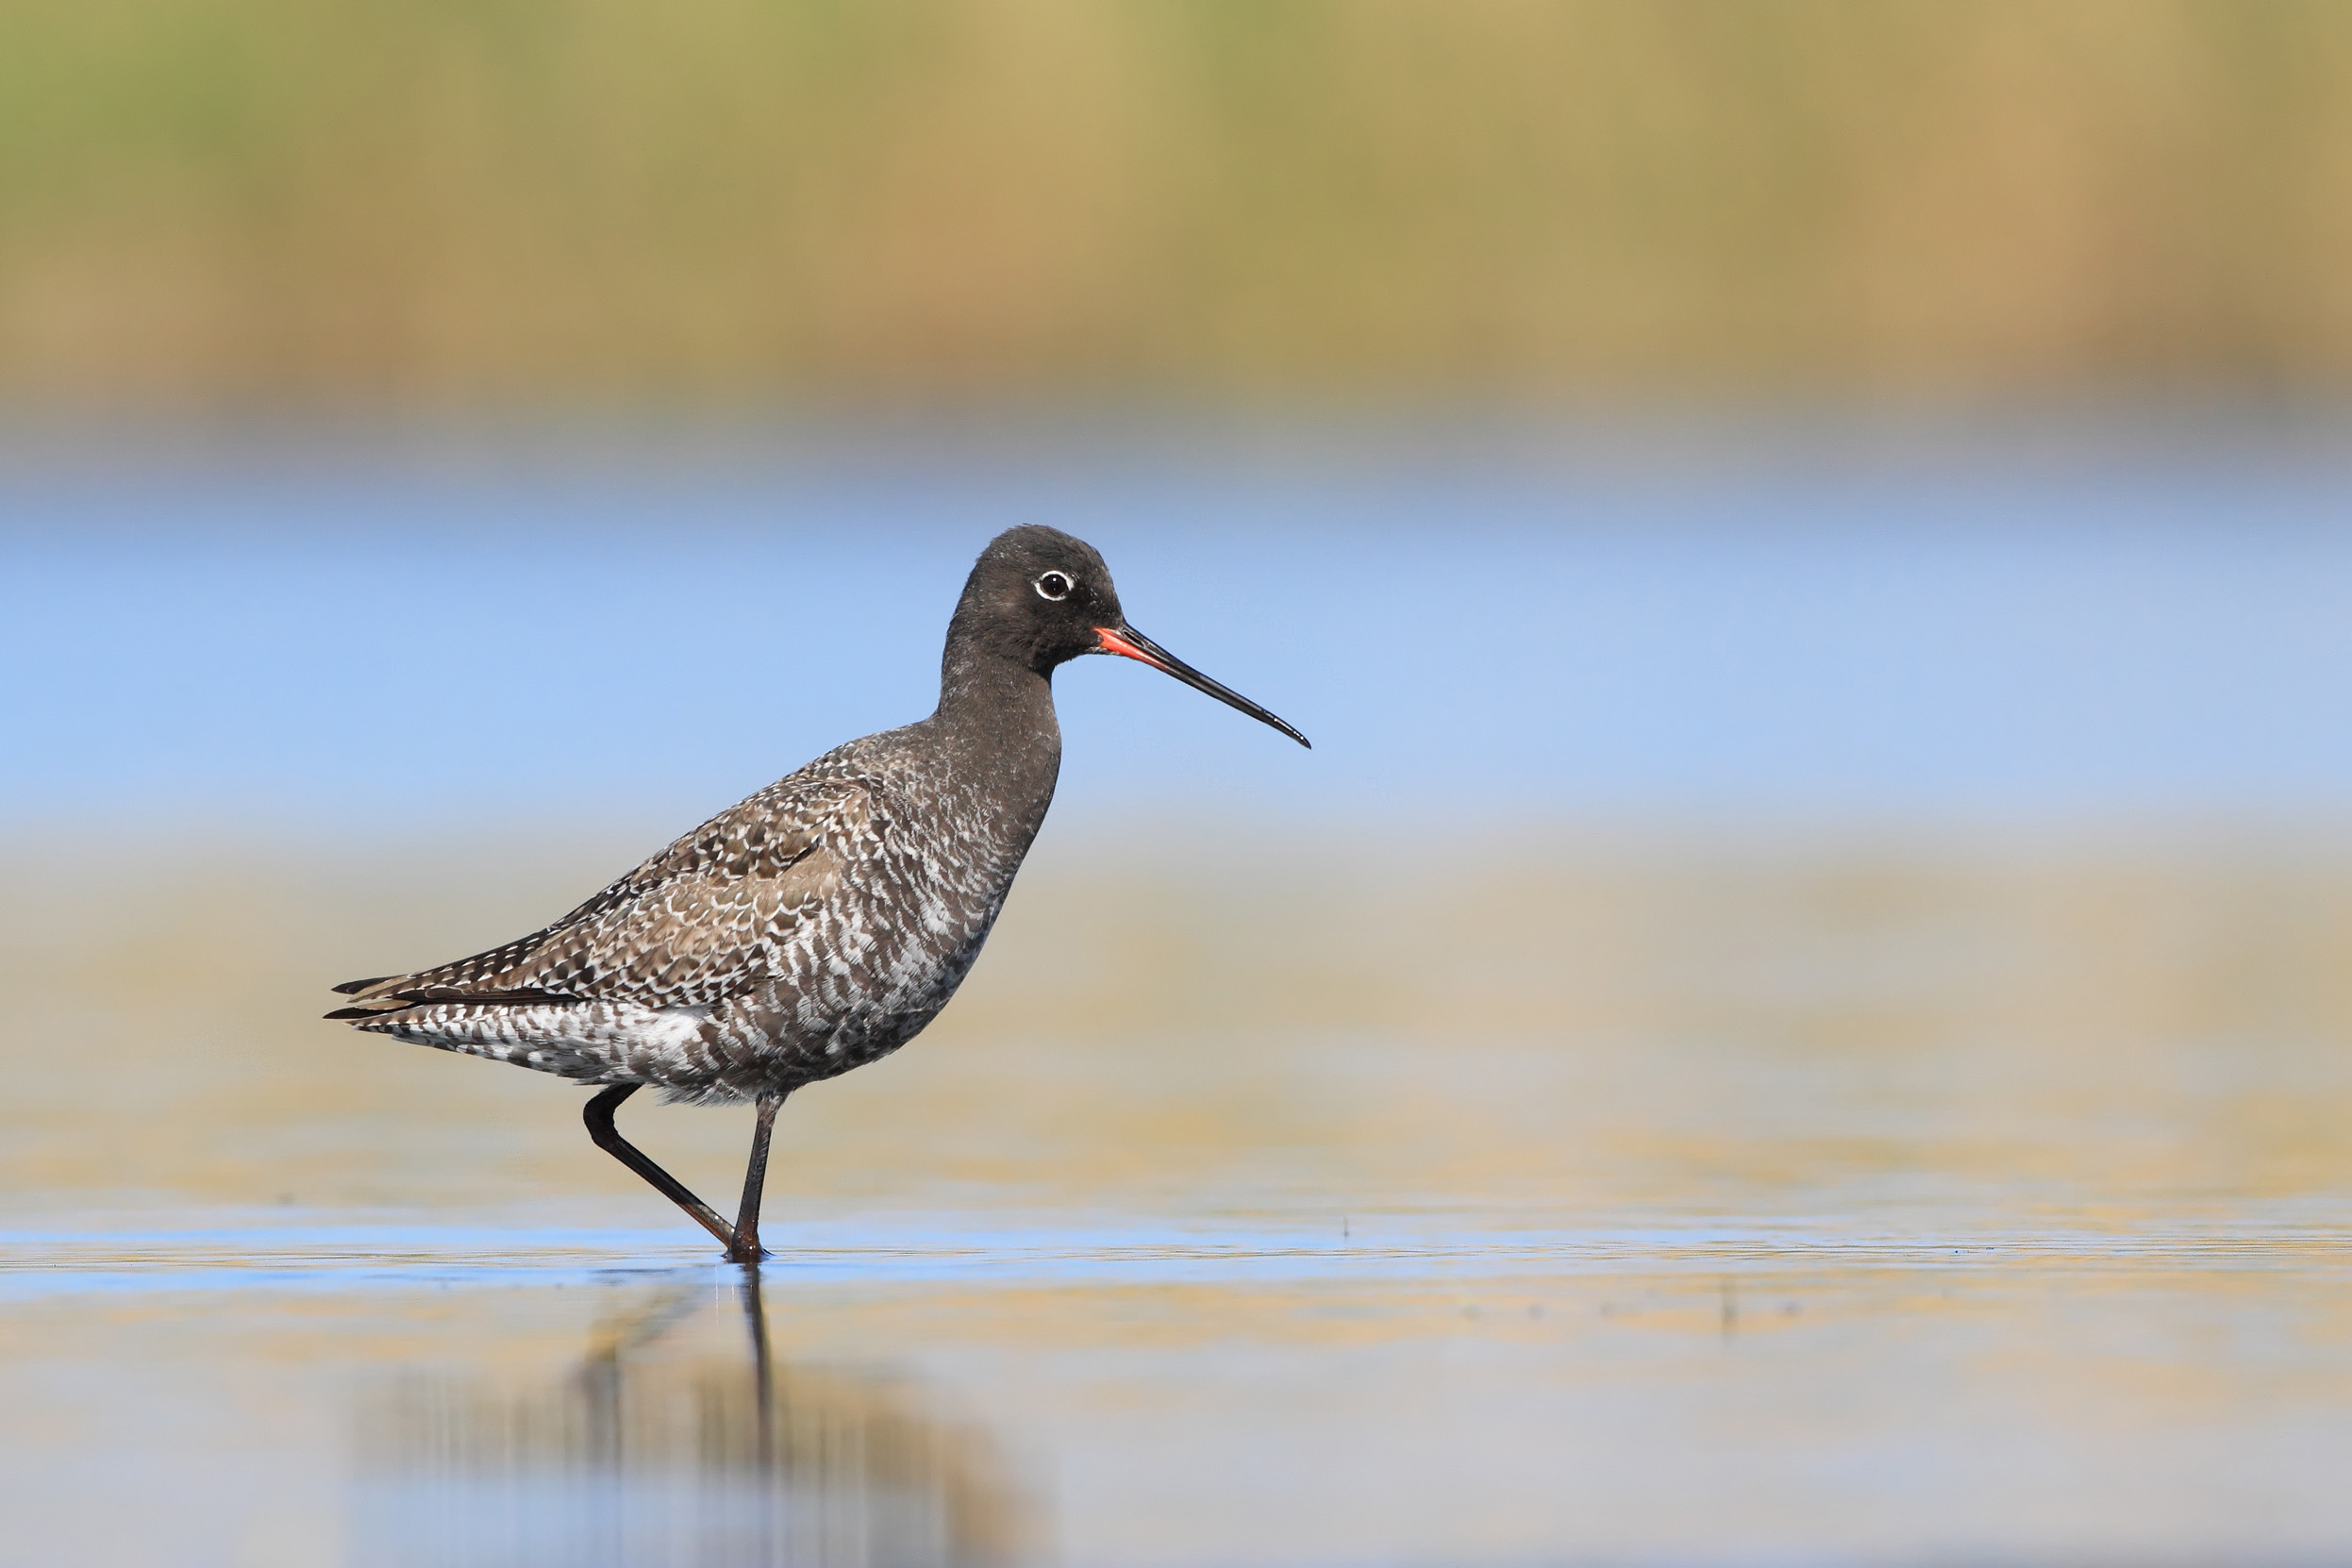 Spotted Redshank with summer plumage, walking through shallow water